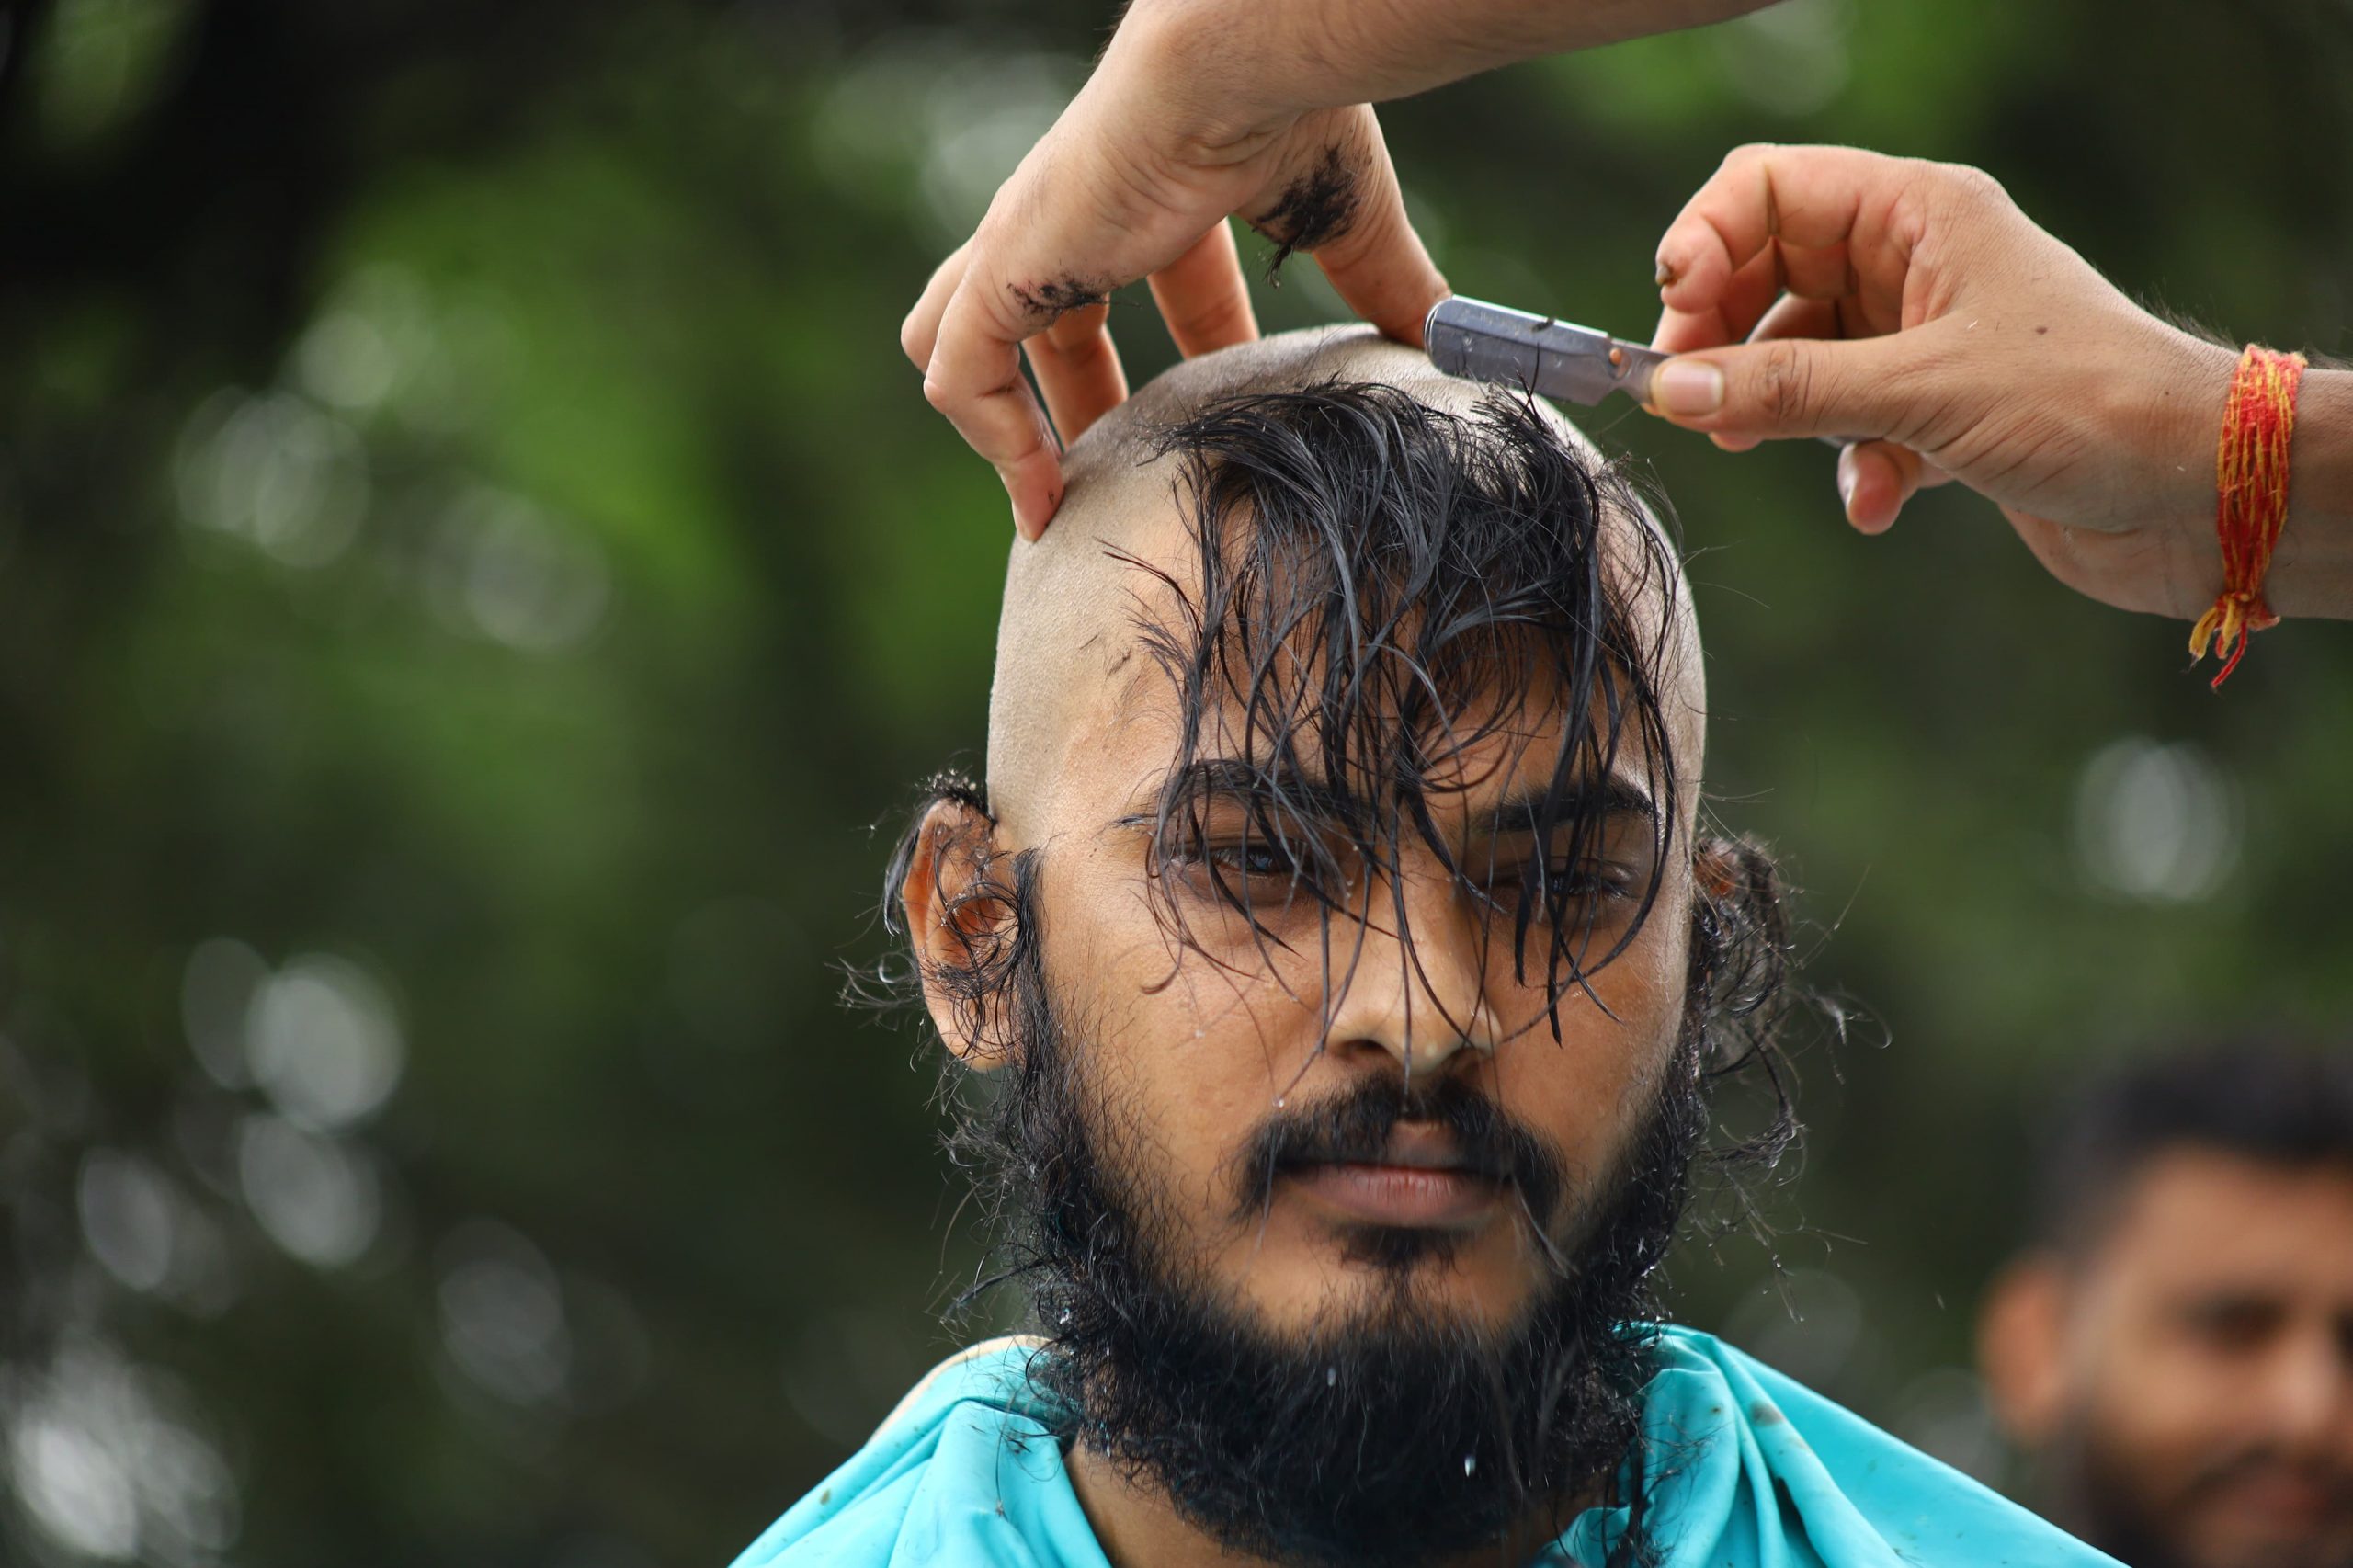 Mass shaving of hair in protest against Aarati Sah’s lack of justice (photos)